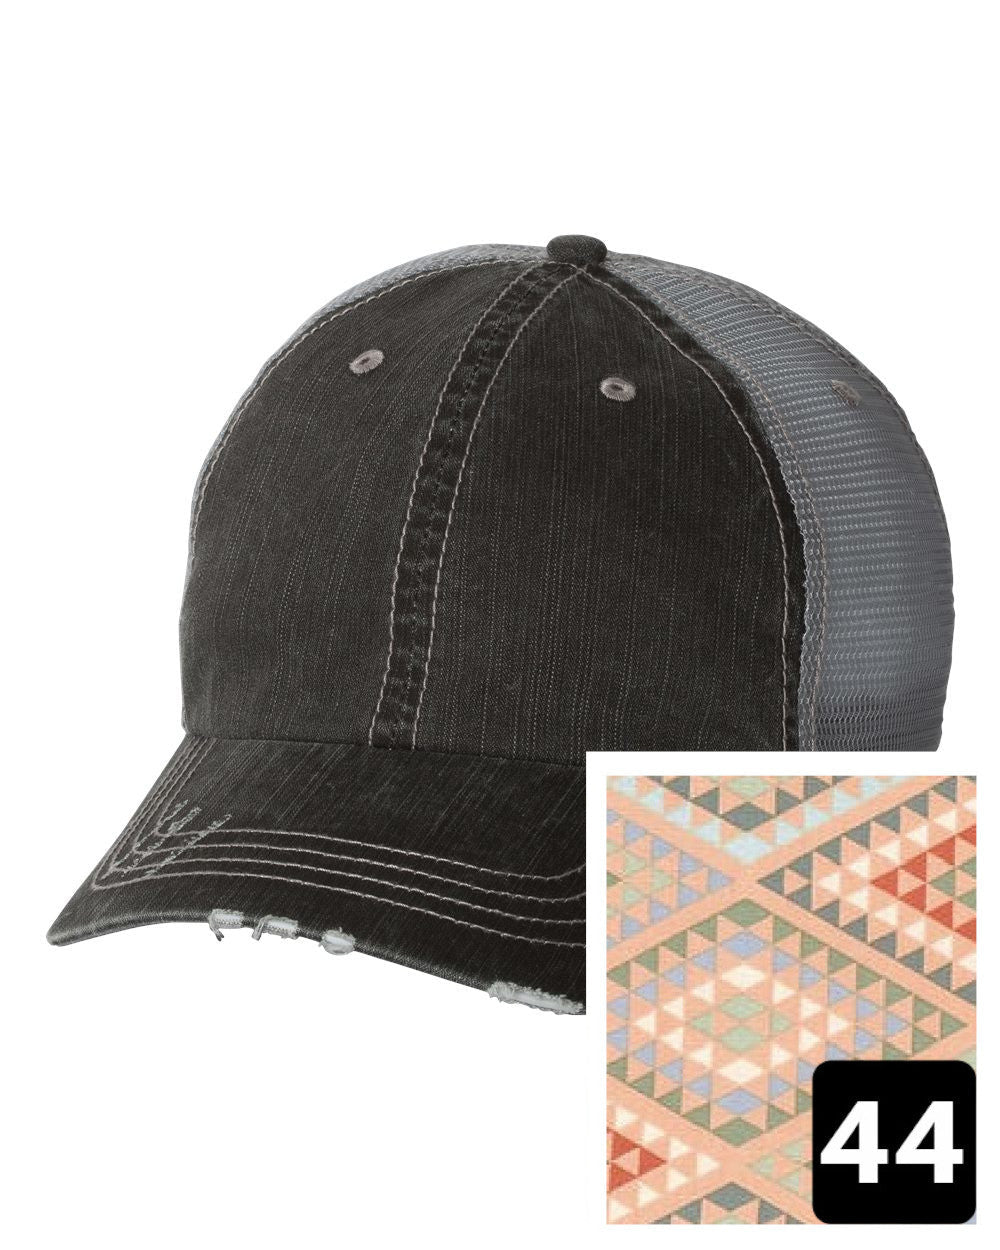 gray distressed trucker hat with navy coral and white chevron fabric state of Arkansas